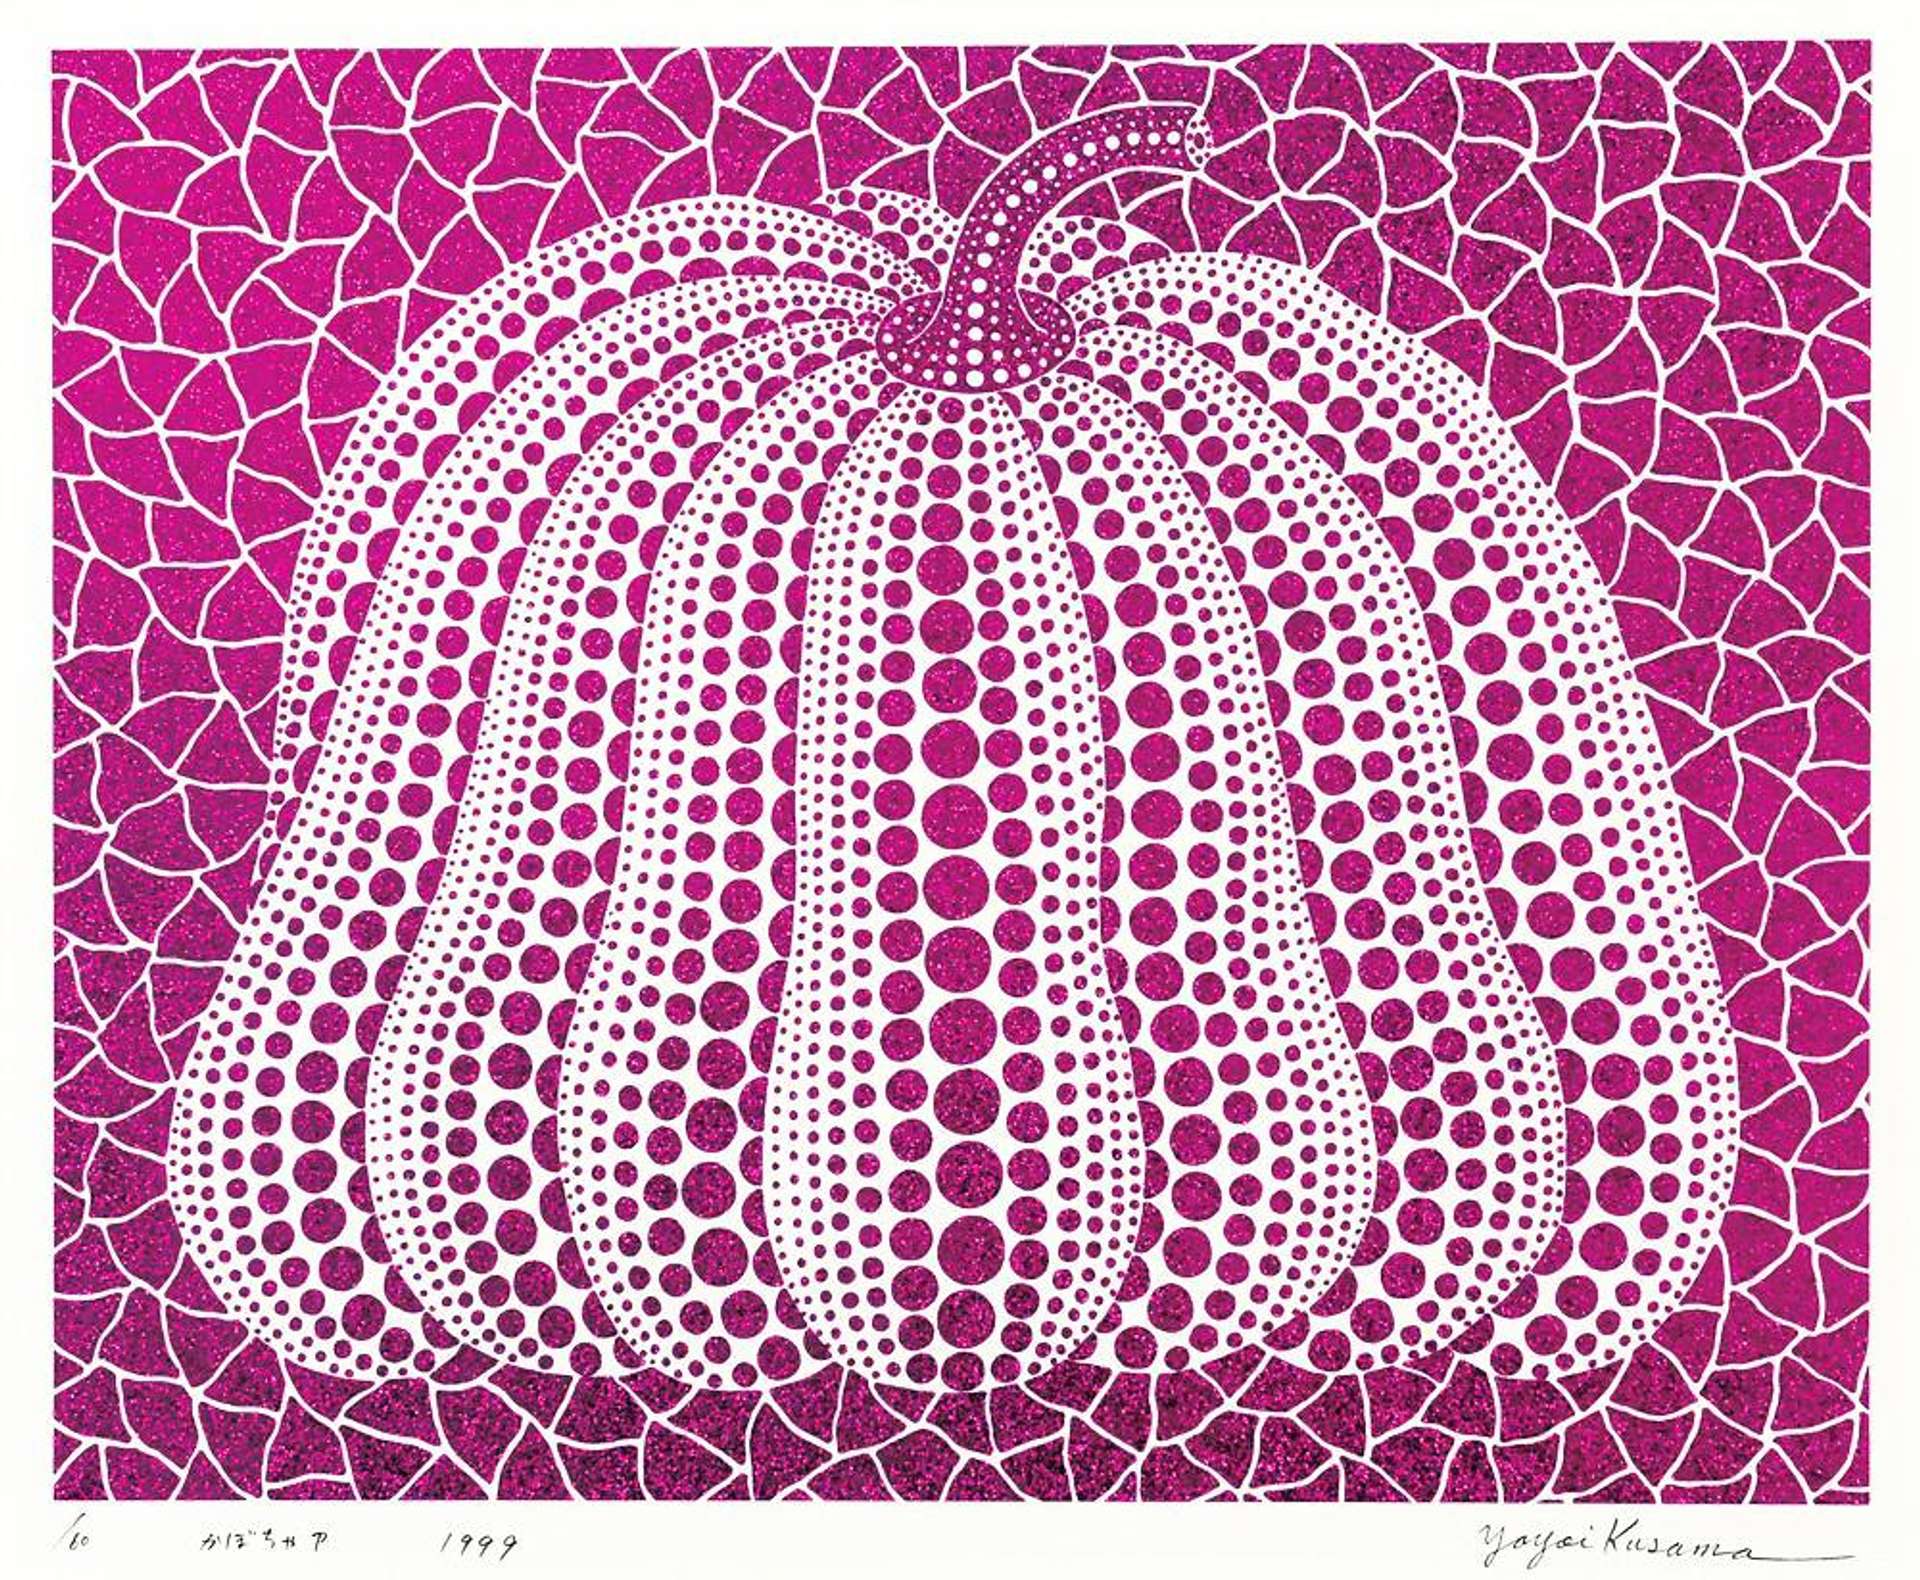 This print shows one of Kusama's signature pumpkins, depicted in polka dots. The print is almost entirely pink, with details outlined in white.